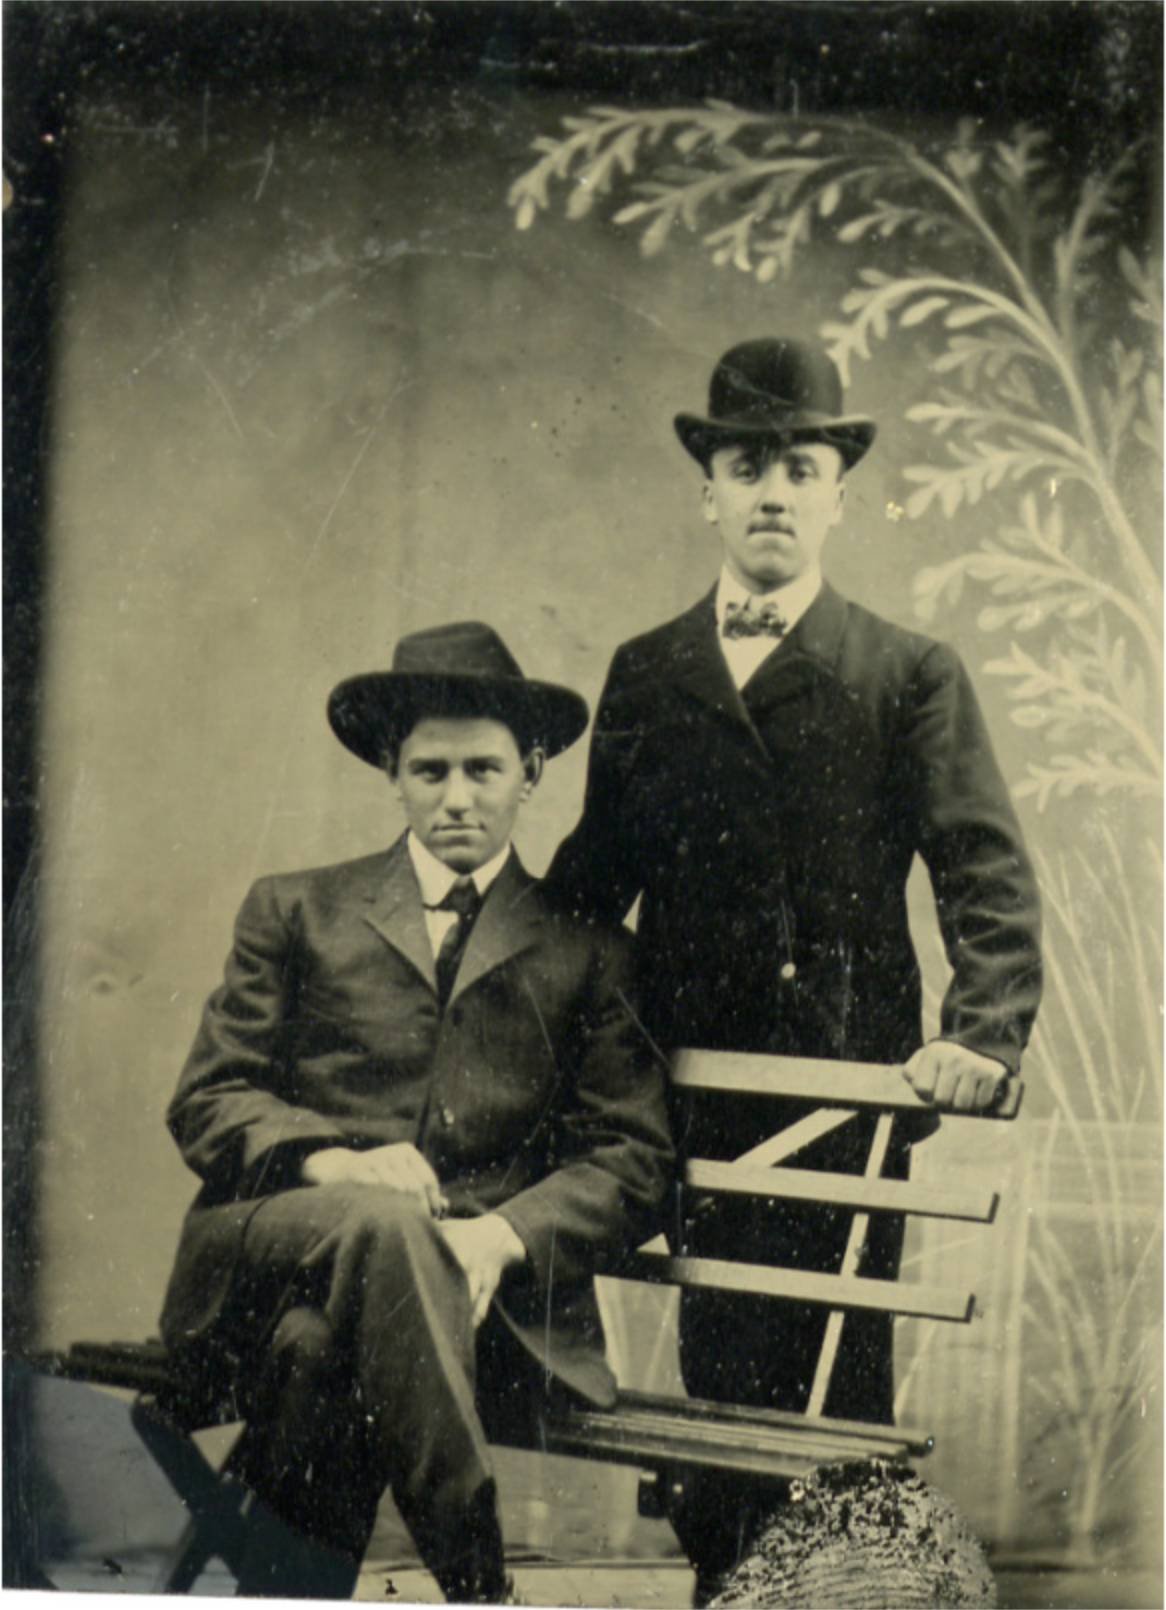 scan of tintype of two men; one seated on wooden bench, one standing behind him resting hand on shoulder